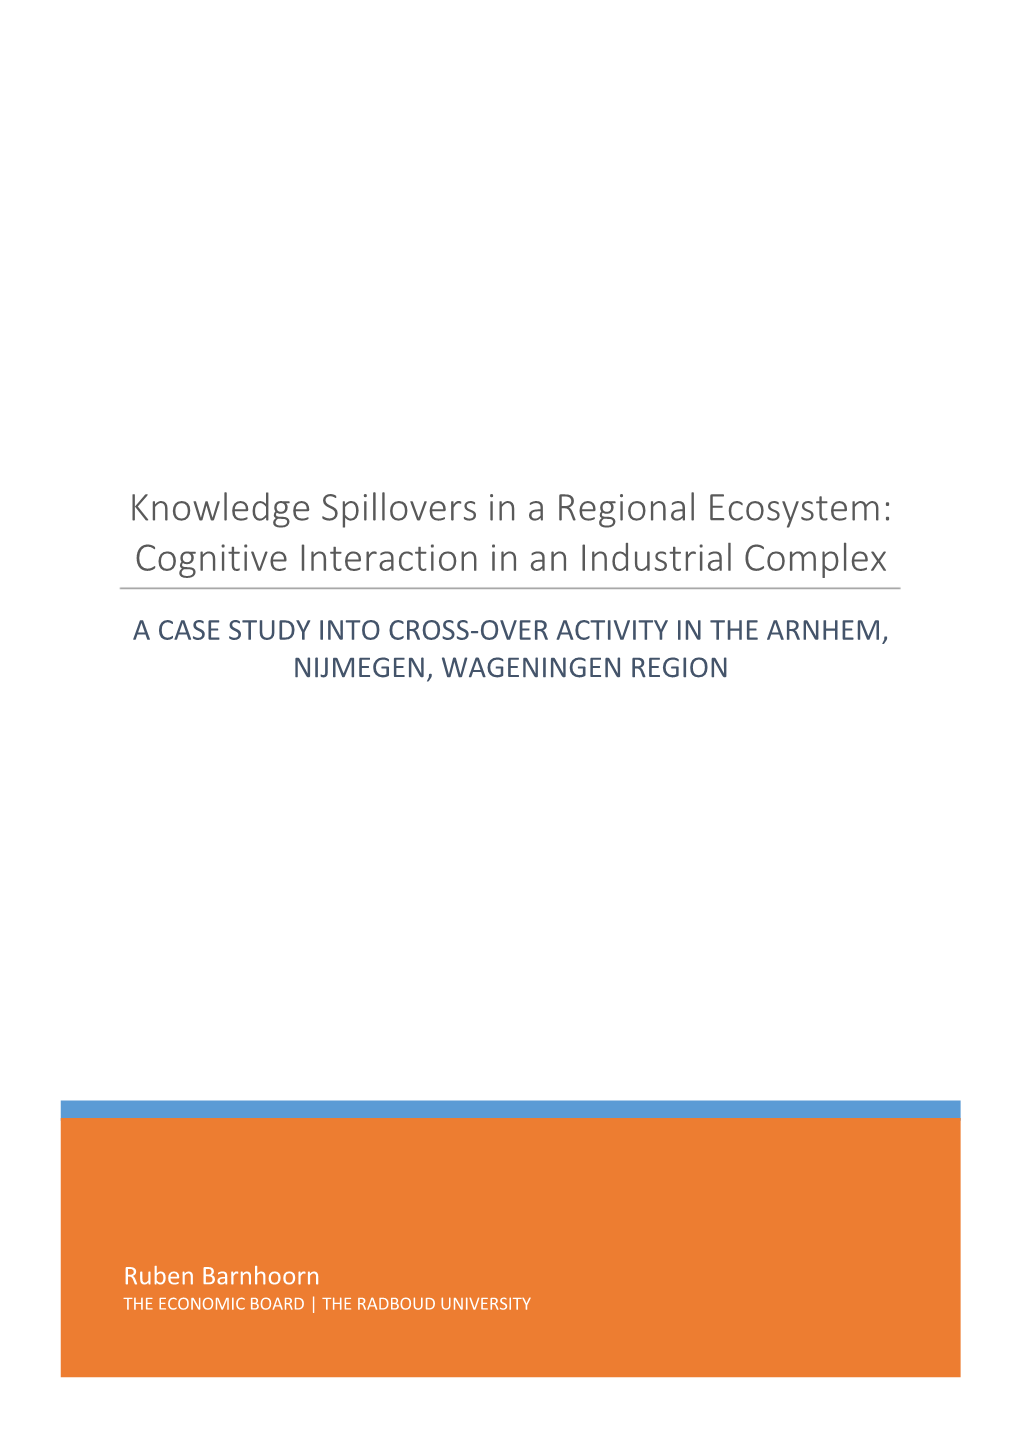 Knowledge Spillovers in a Regional Ecosystem: Cognitive Interaction in an Industrial Complex